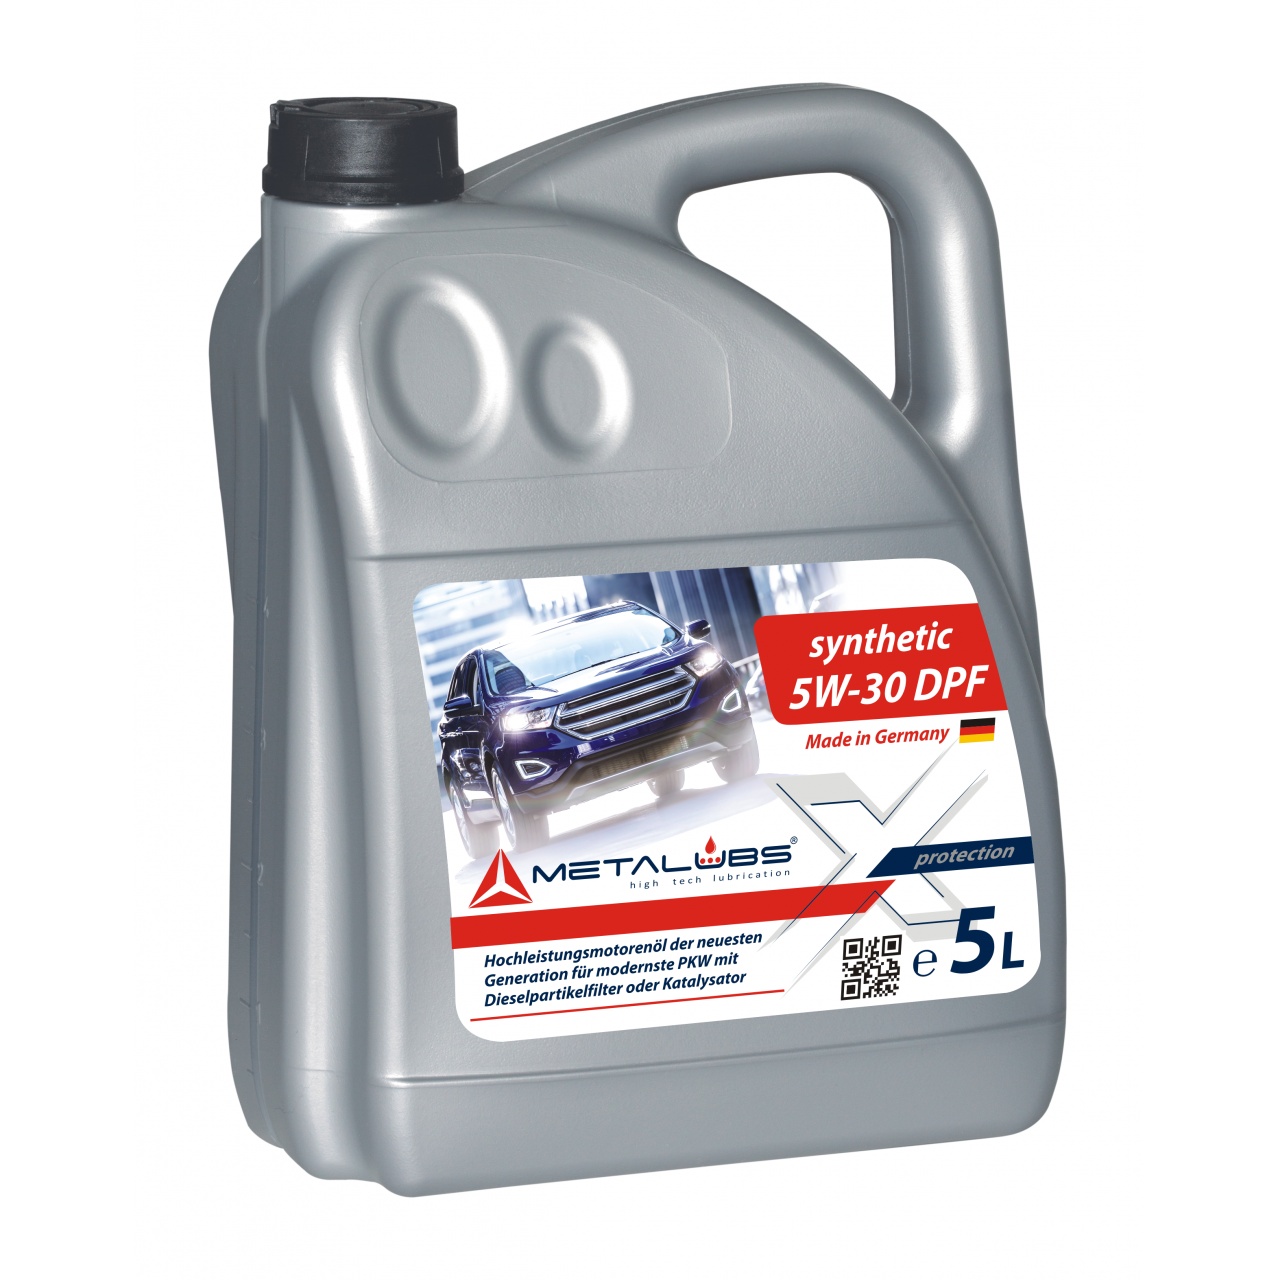 Metalubs Synthetic Oil 5W-30 DPF 5l